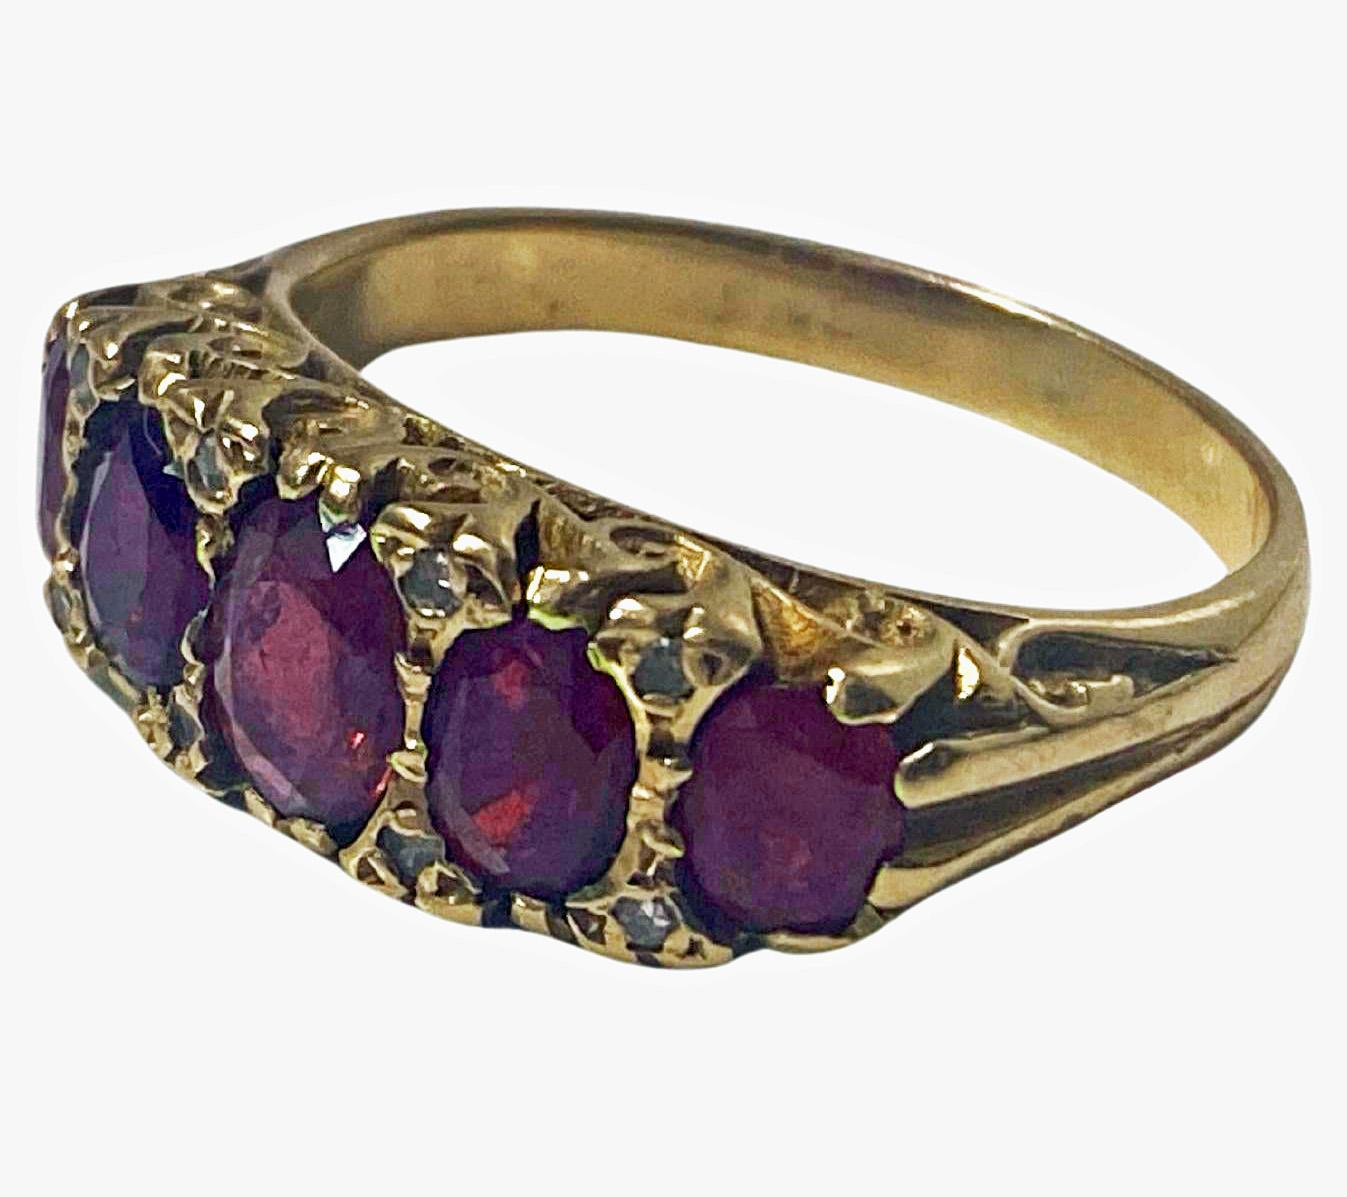 Antique Victorian five stone half hoop Ruby and Diamond 18K Ring, C.1890 The Ring comprising of five graduated oval faceted Purple Red Rubies, weighing a total of approximately 3.00 ct. accented at each corner with a small rose cut diamond. The